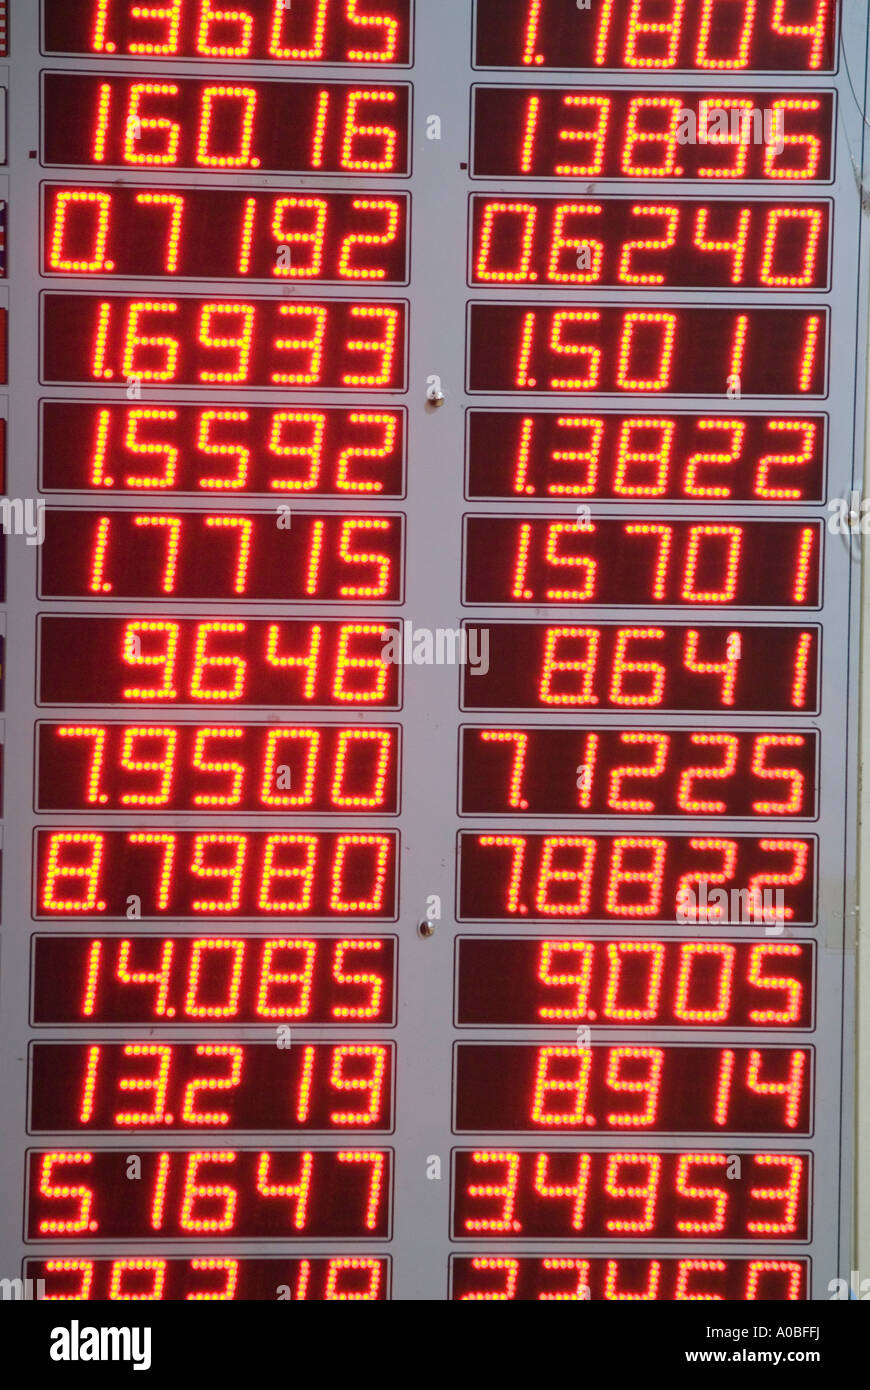 Red numbers on an LED display showing currency exchange rates at a bureau de change Stock Photo